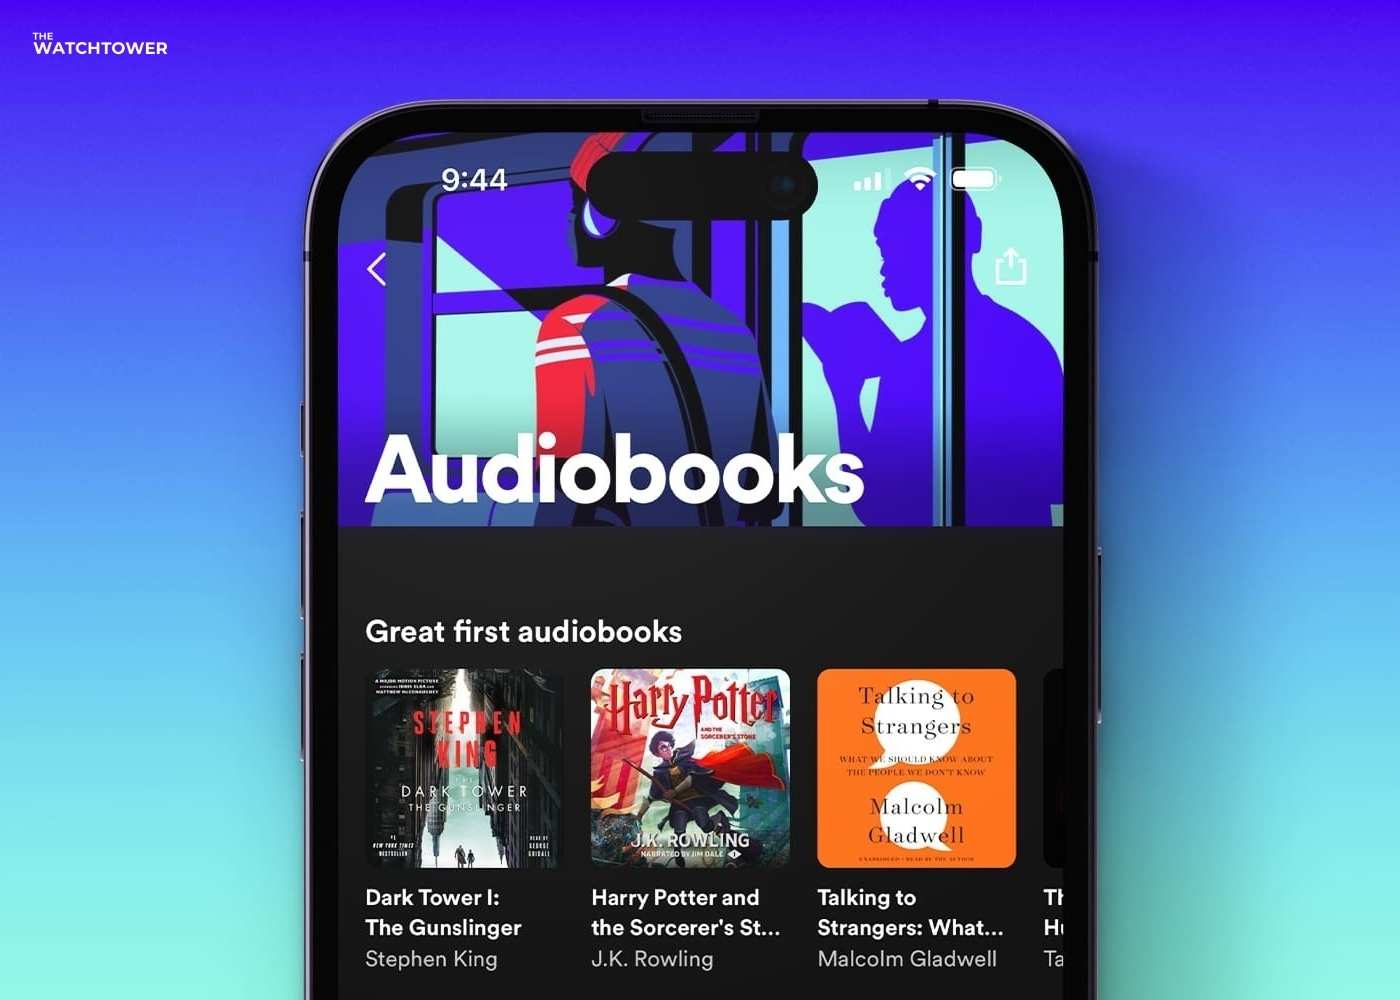 Spotify takes on Amazon Audible by providing over 300,000 audiobooks upon launch